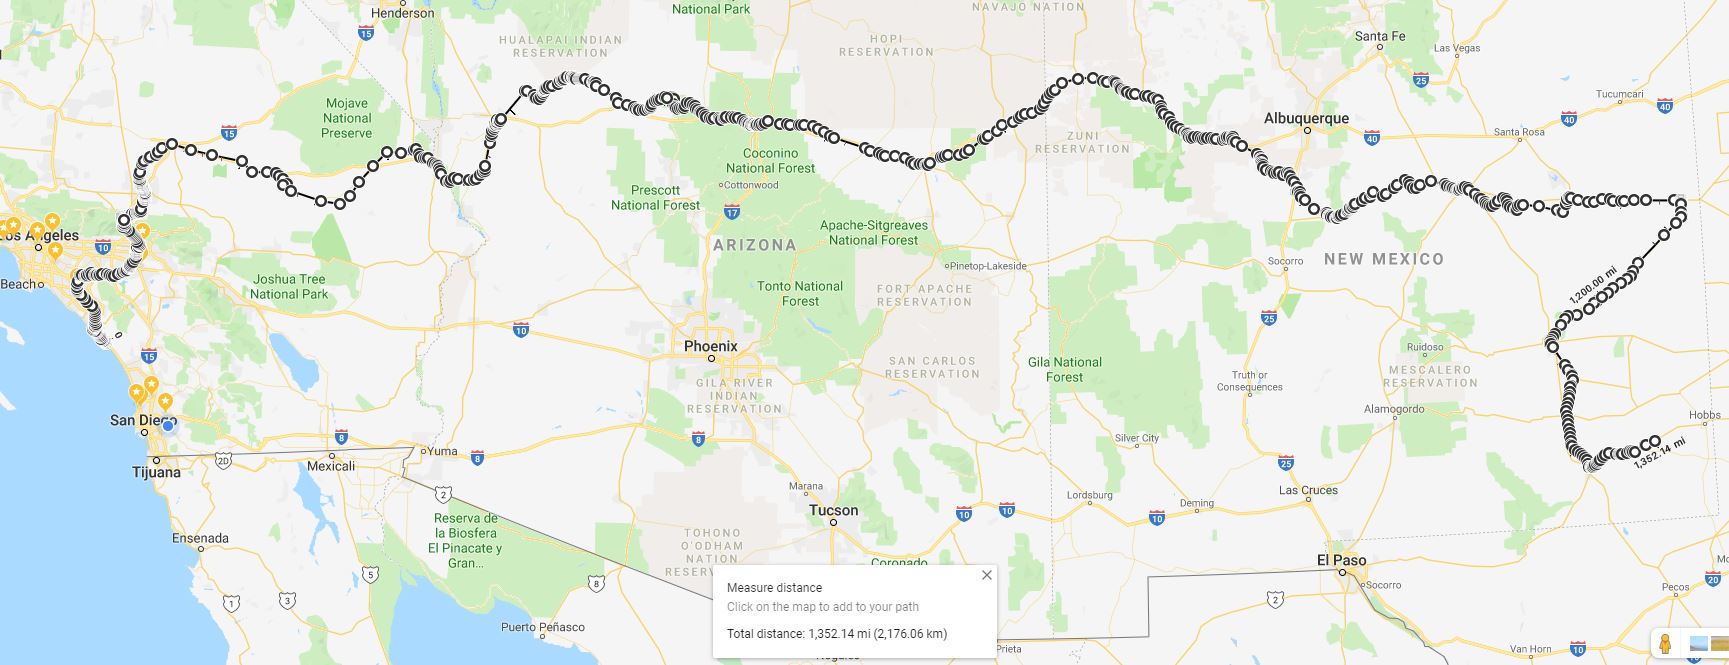 Overall rail Route to NM site.JPG